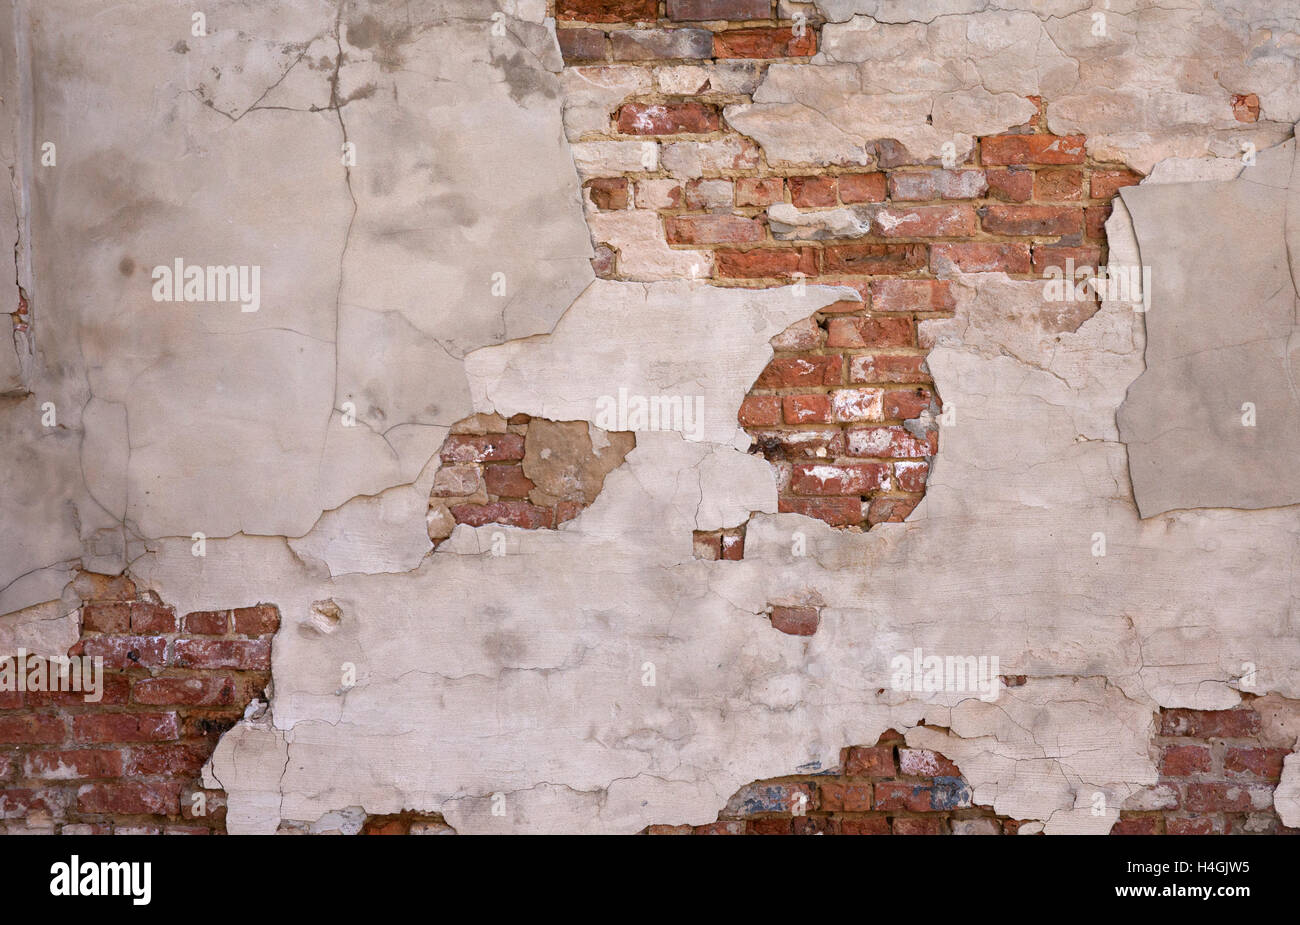 "Painted Wall Background #2"   Painted plastered wall with exposed brick. Stock Photo